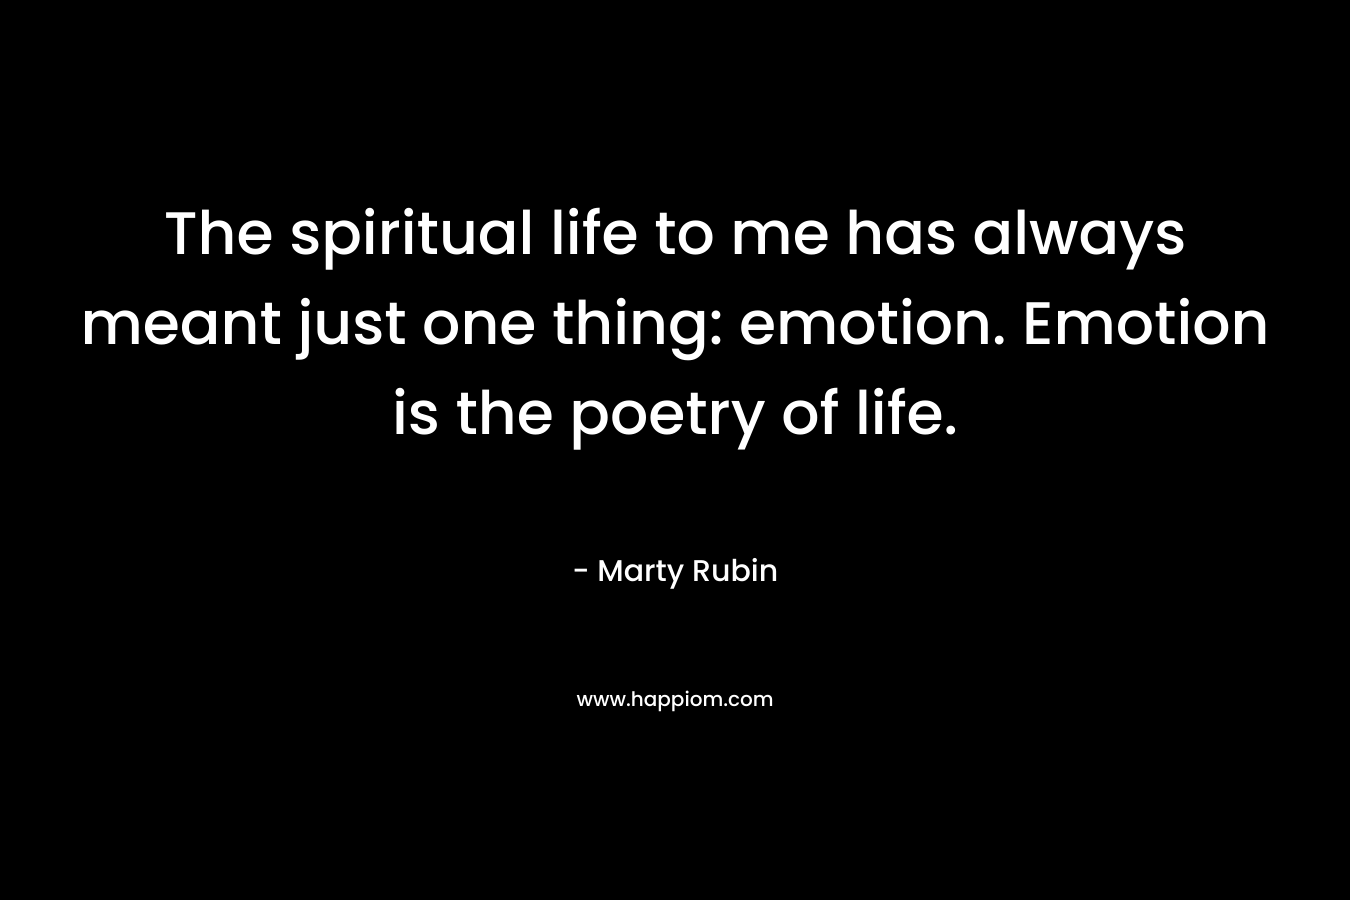 The spiritual life to me has always meant just one thing: emotion. Emotion is the poetry of life.